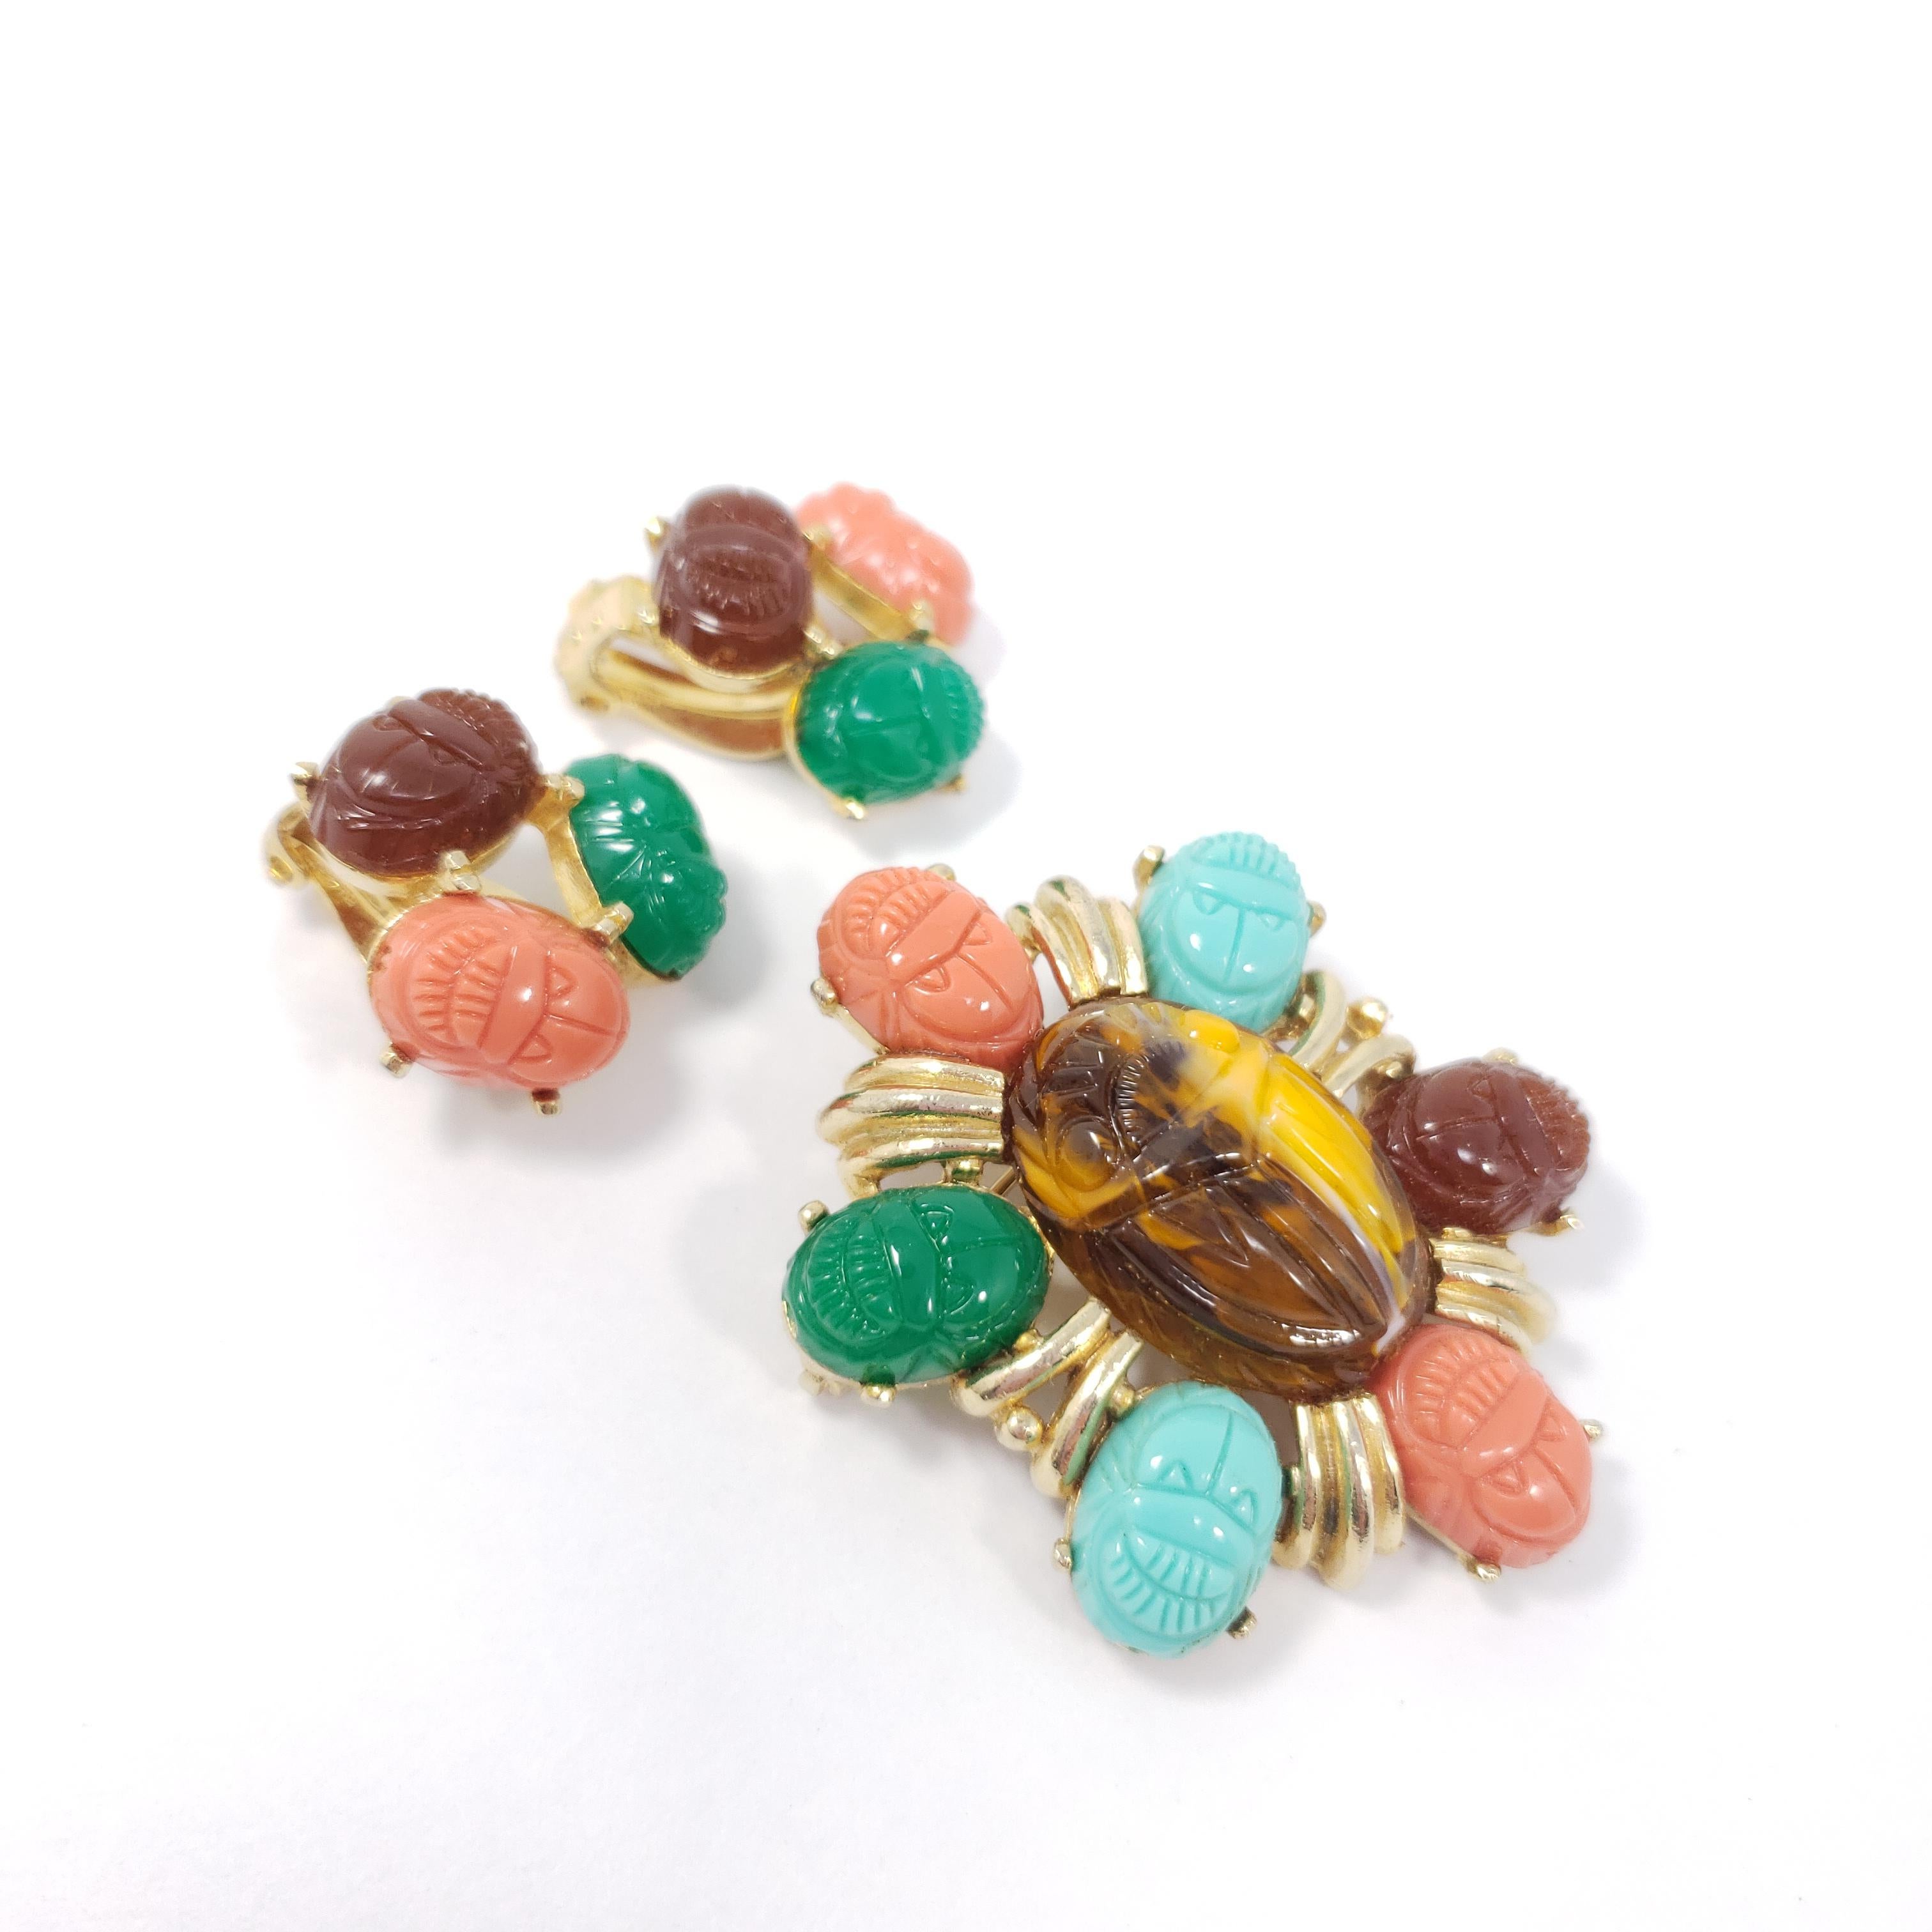 A colorful pin brooch and clip-on earring set by Tara, a mid-1900s costume jewelry designer. Each piece features colorful carved resin scarabs prong-set in a gold-tone metal setting. DeLizza and Elster are believed to be the original designers